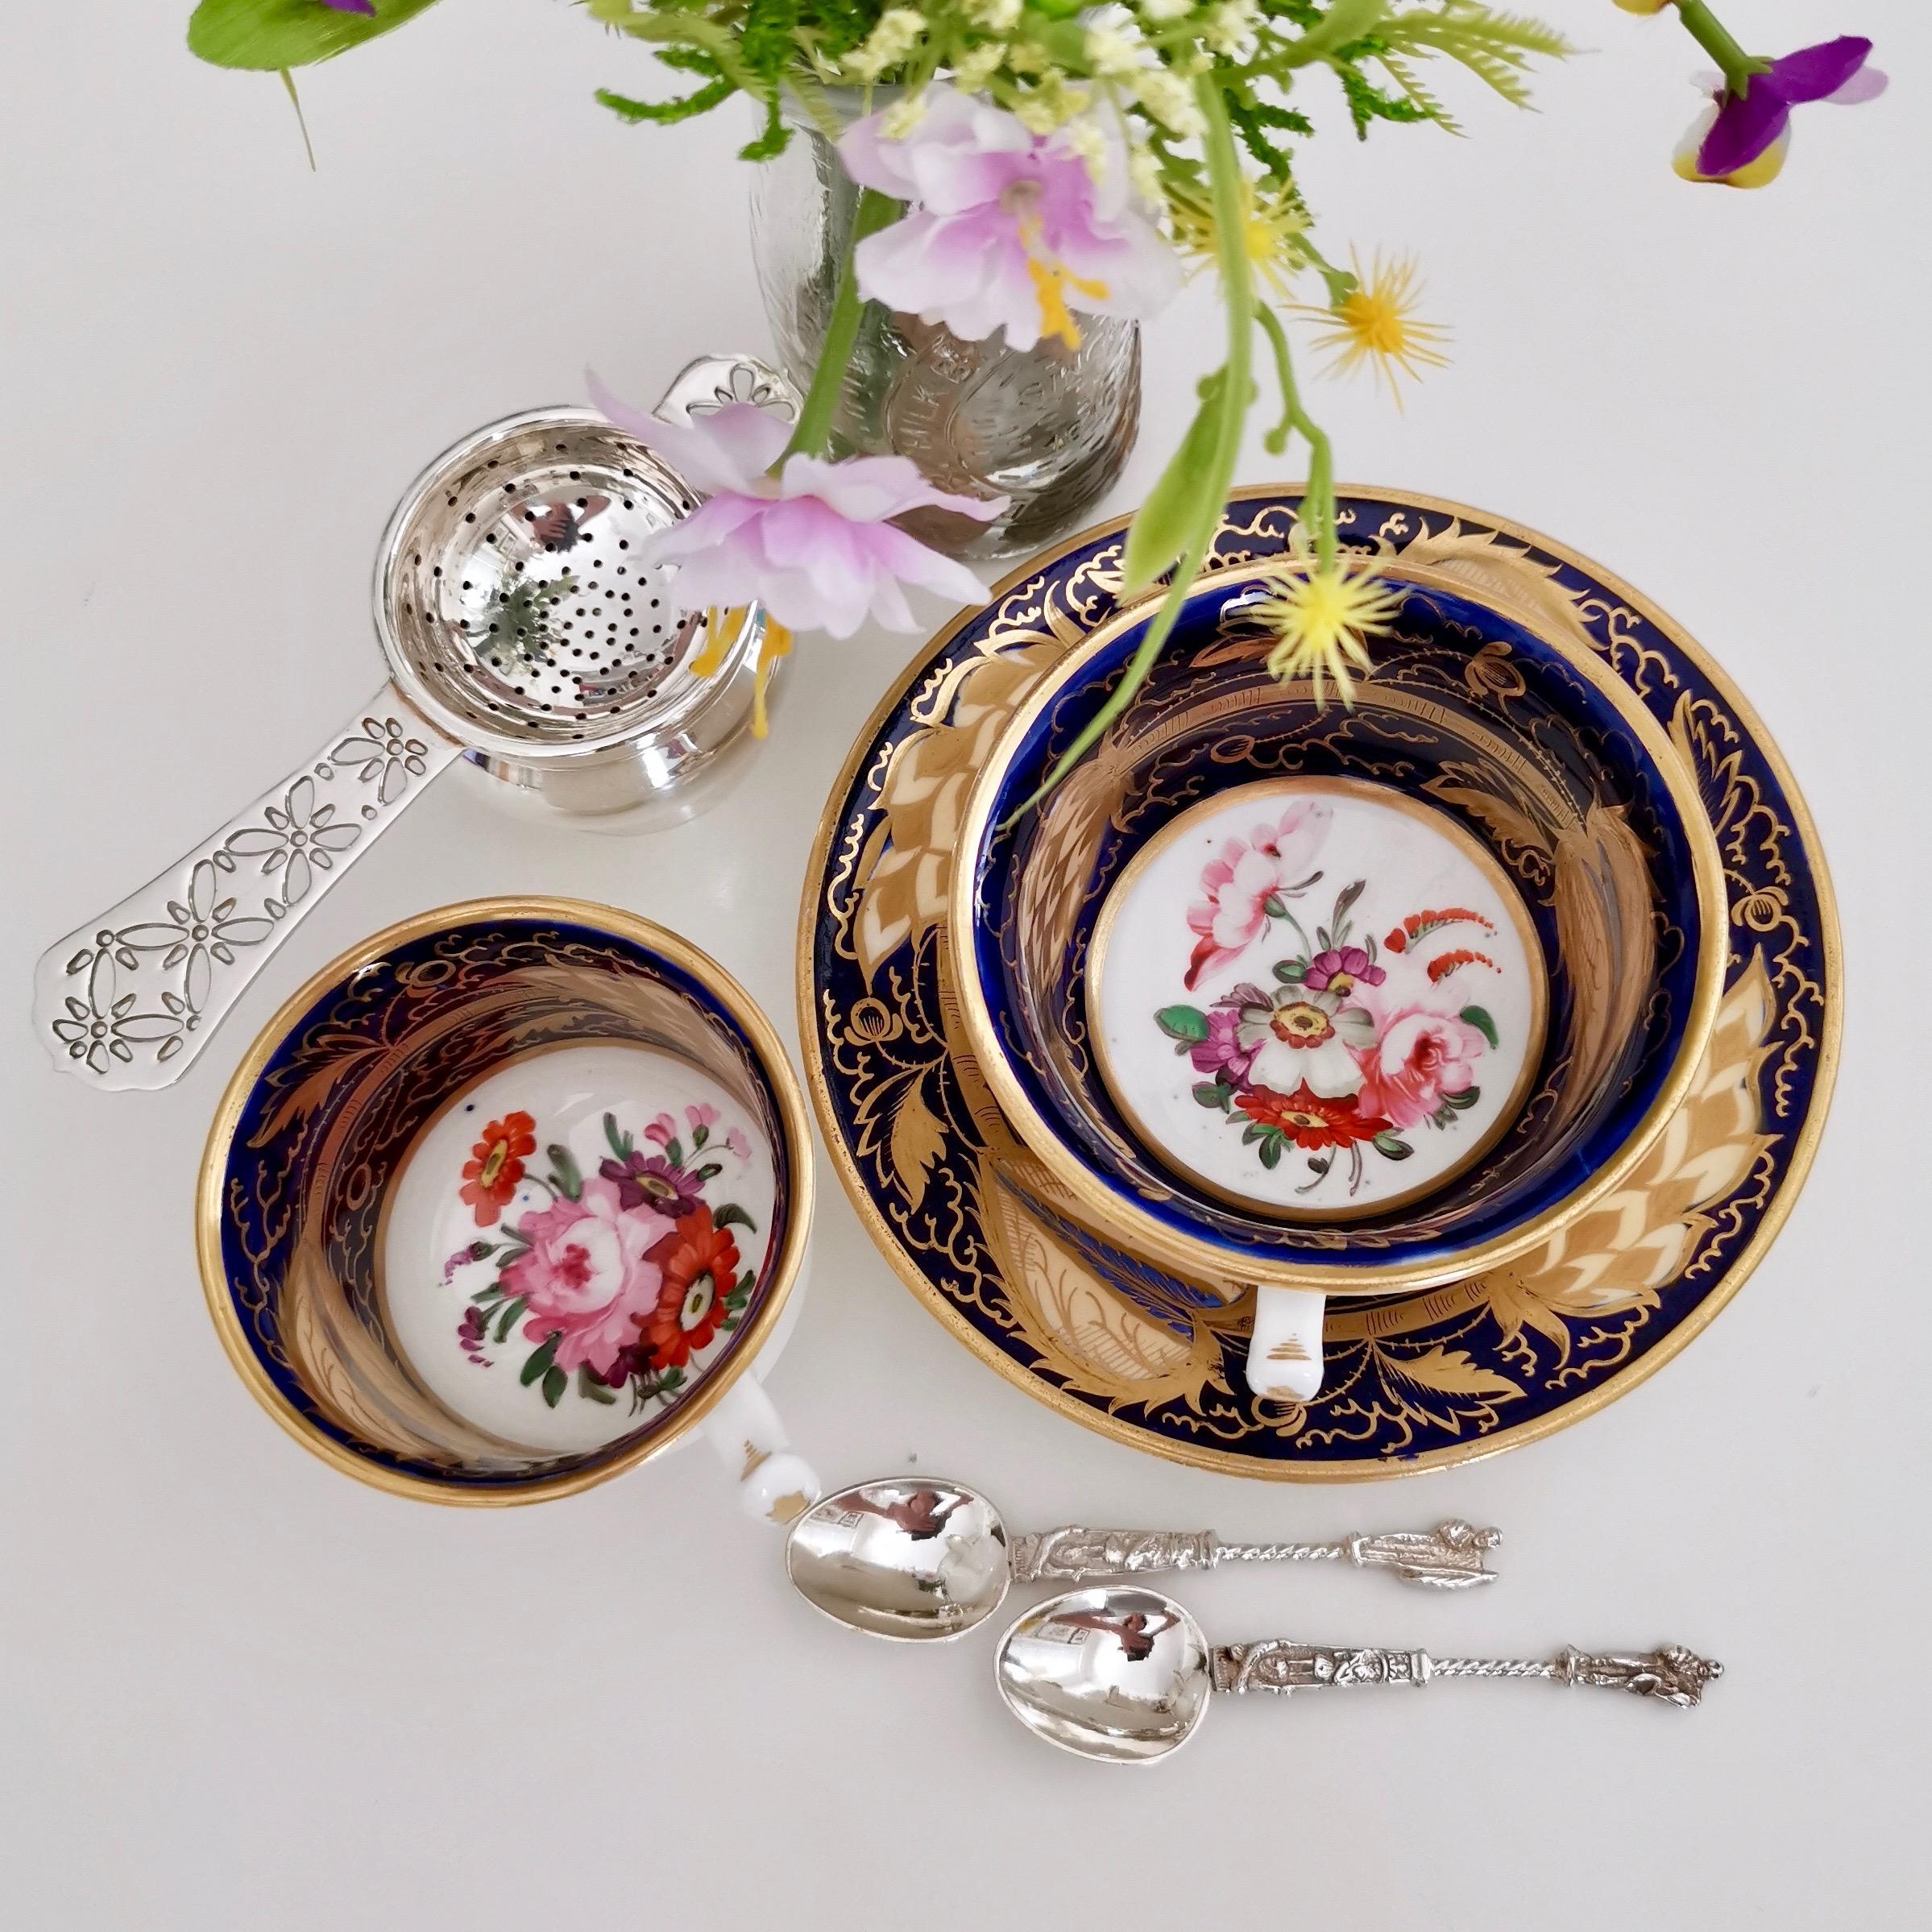 This is a beautiful trio made by an unknown Staffordshire maker around the year 1820. The trio consists of a teacup, coffee cup and saucer. In the early 19th Century teacups and coffee cups were sold sharing the same saucer - you would never drink